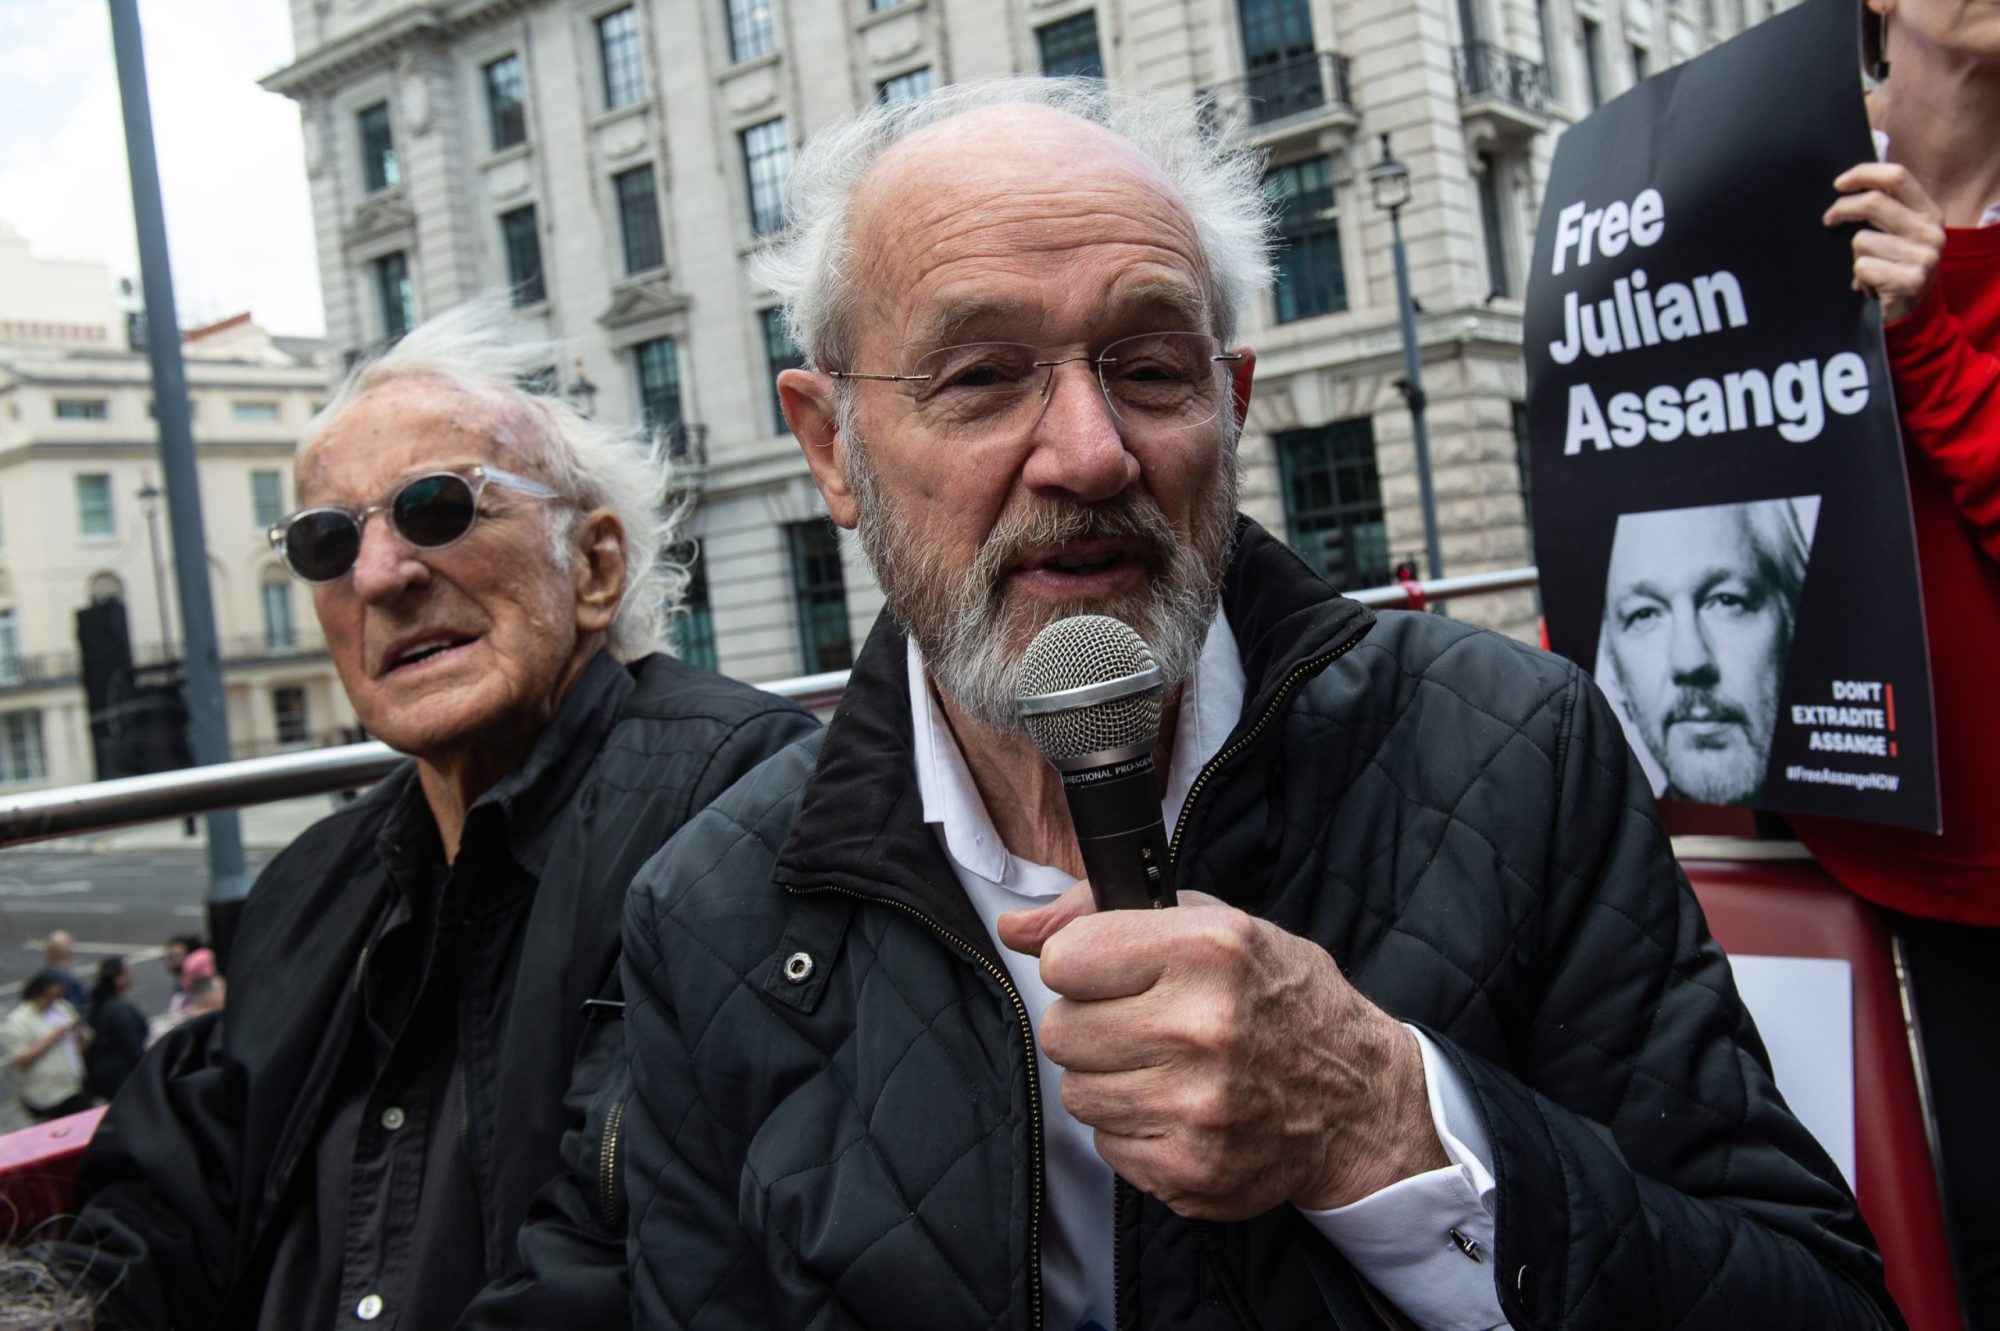 John Shipton, father of Julian Assange, addresses his supporters on July 1, 2022, in London, England.